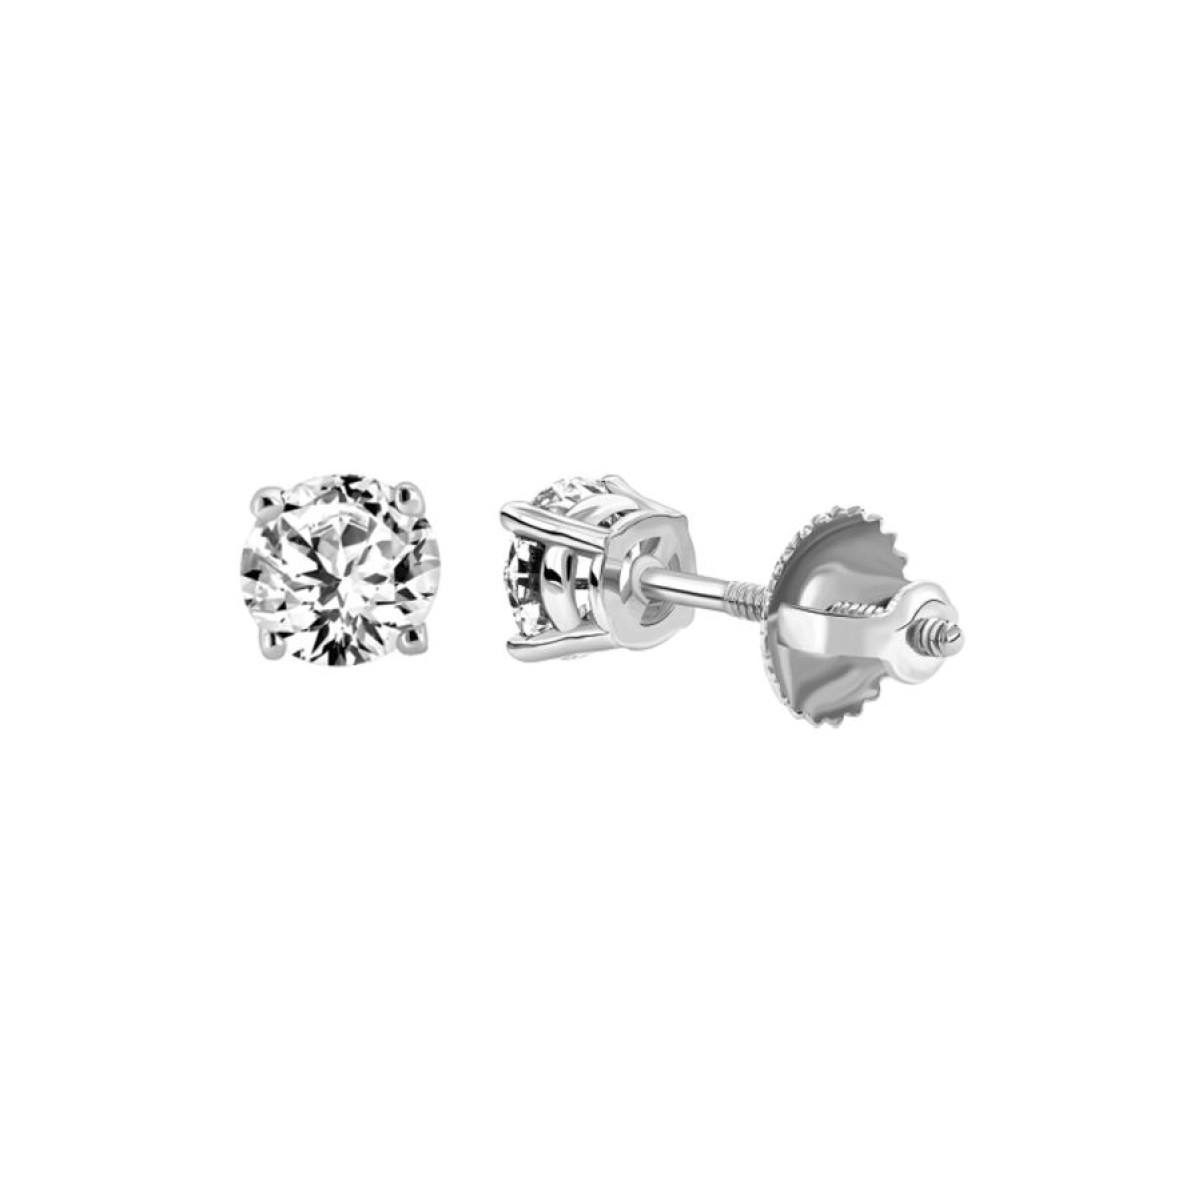 SOLITAIRE EARRINGS 0.25CT ROUND DIAMOND 14k WHITE GOLD